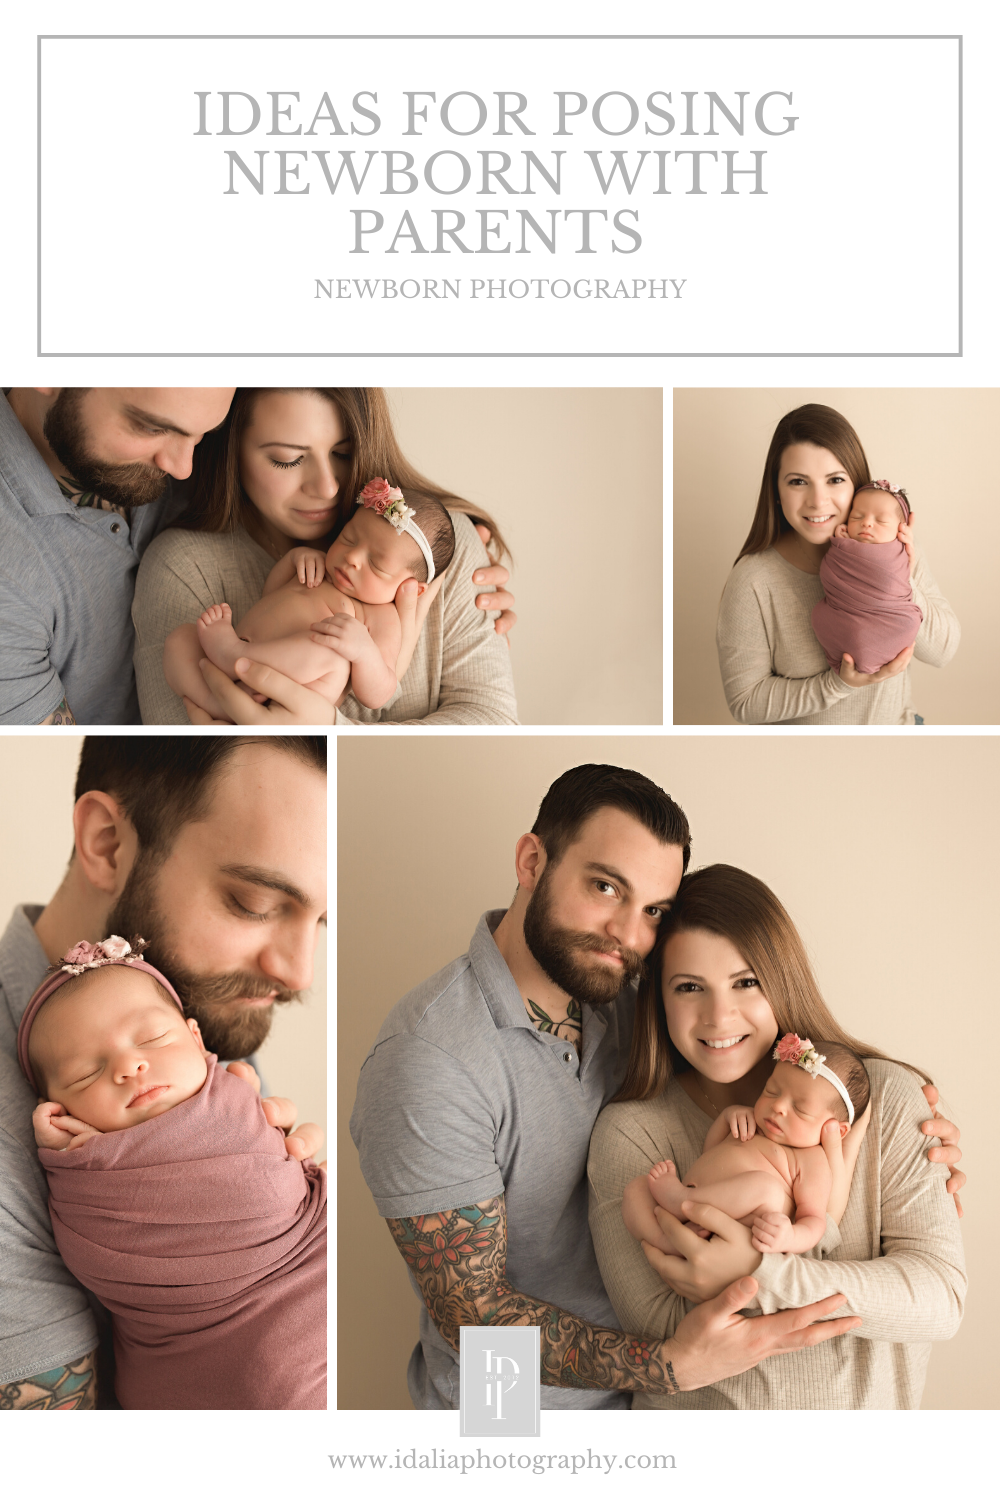 Ideas for posing a newborn with parents by Idalia Photography